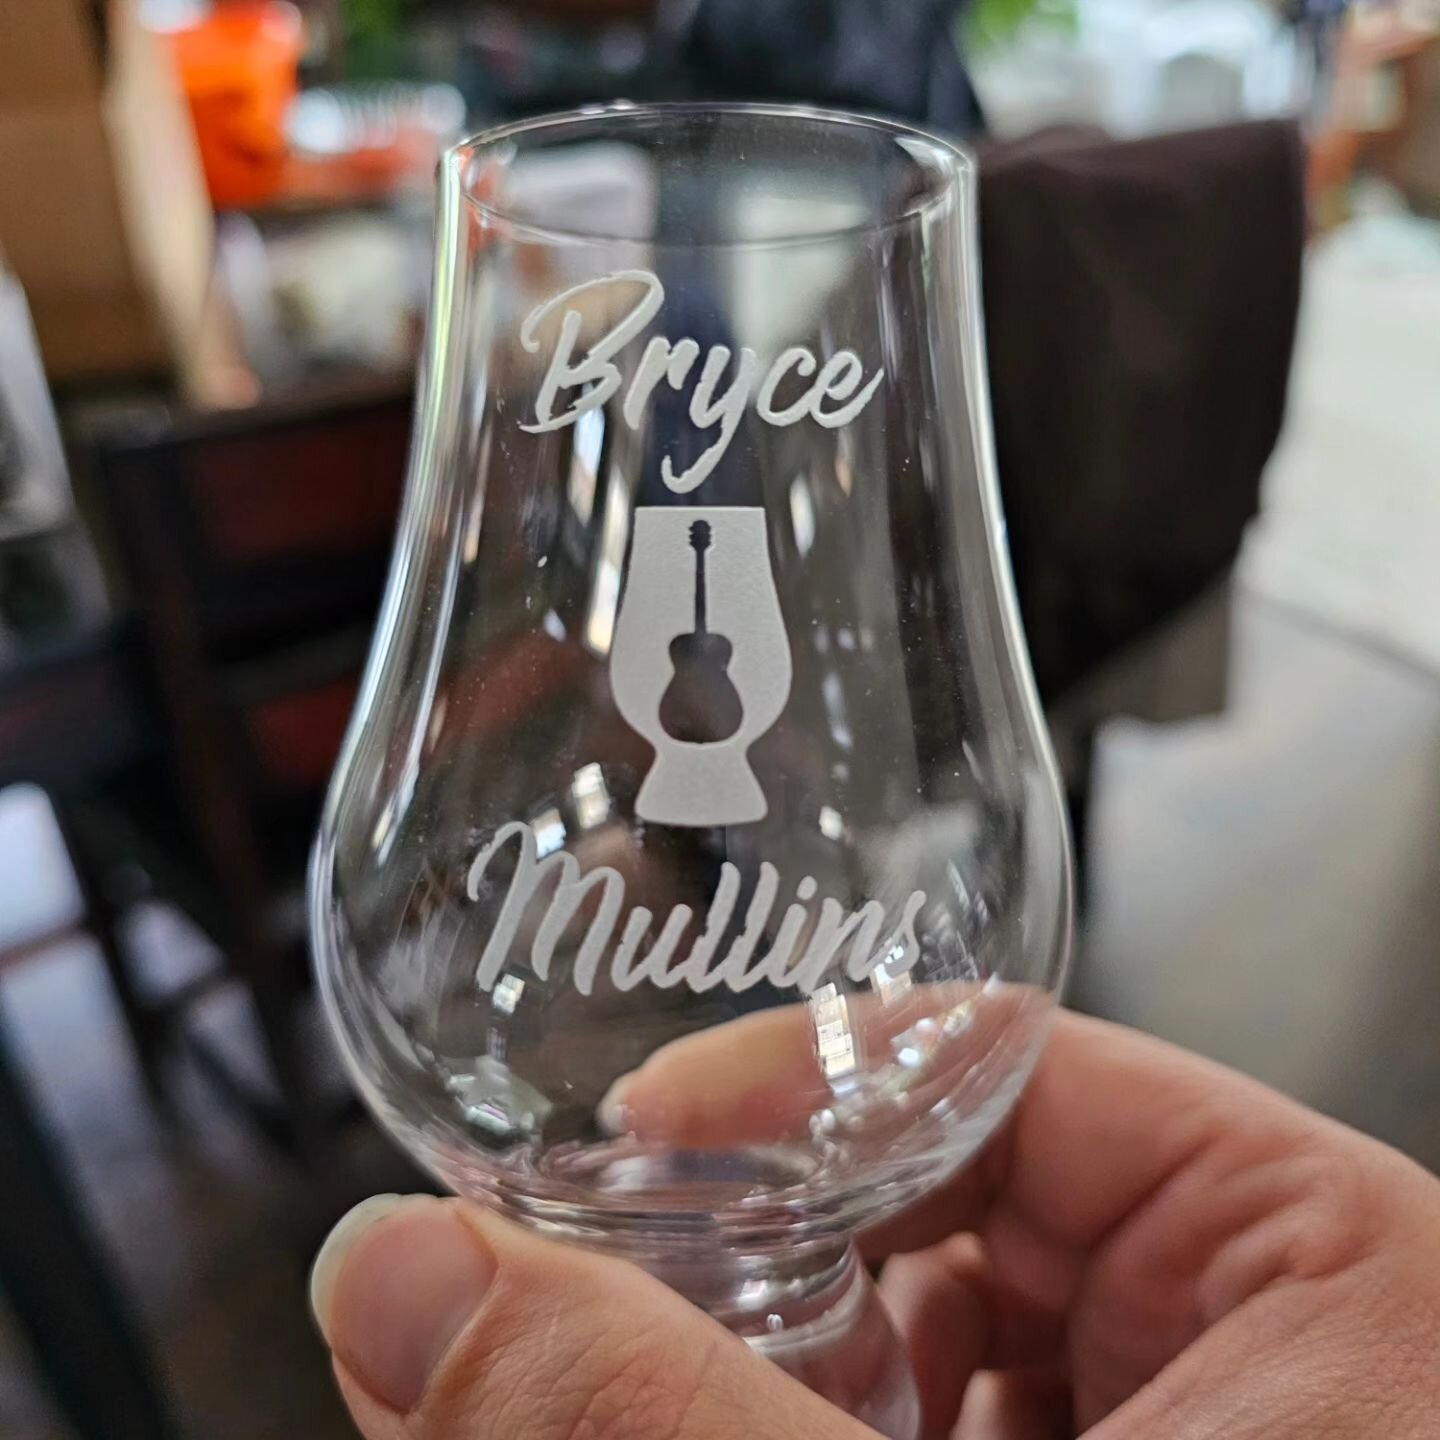 Perfect holiday gift for the whiskey lover in your family! Let me know if you want one or two! I have some in stock but I need to make an order soon if people are interested. They are available on my website store. Link in bio. Or DM for details!